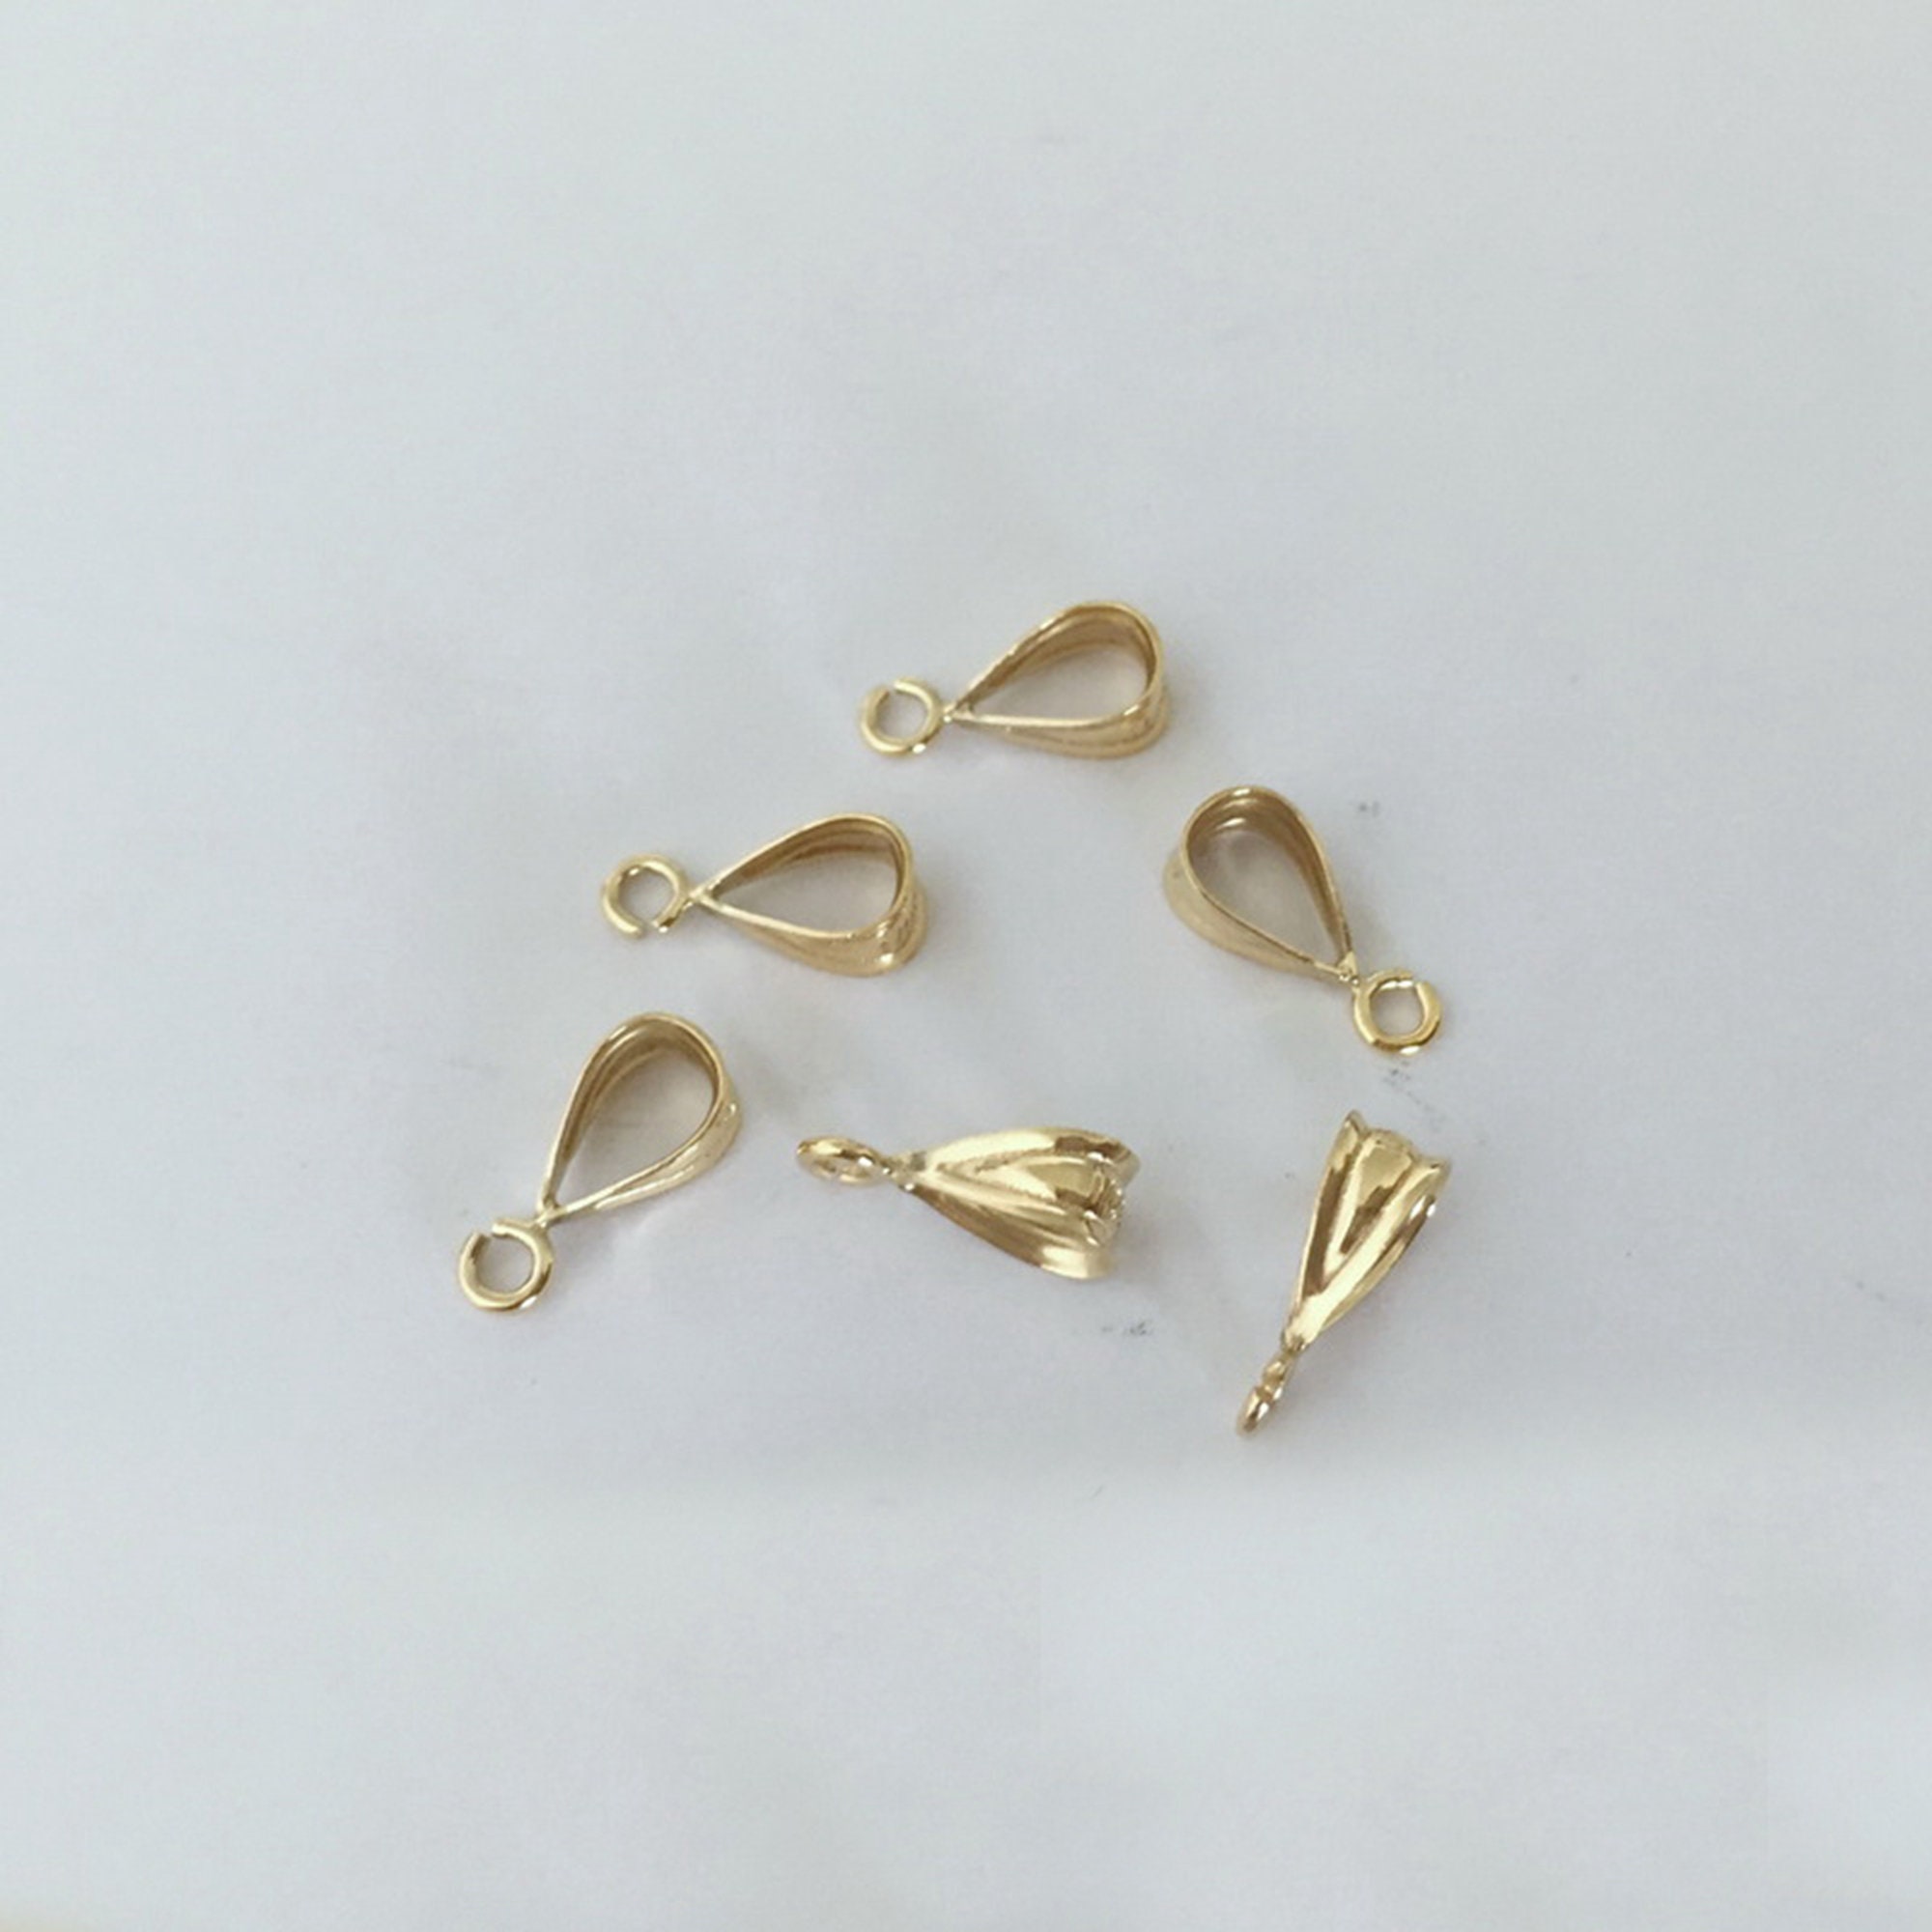 10pcs 14K Gold Plated Shiny Pinch Bails, Gold Tone Pinch Bail Set, Gold  Plated Pinch Bails W/ Hook, Pendant Bail Jewelry Making Supplies 